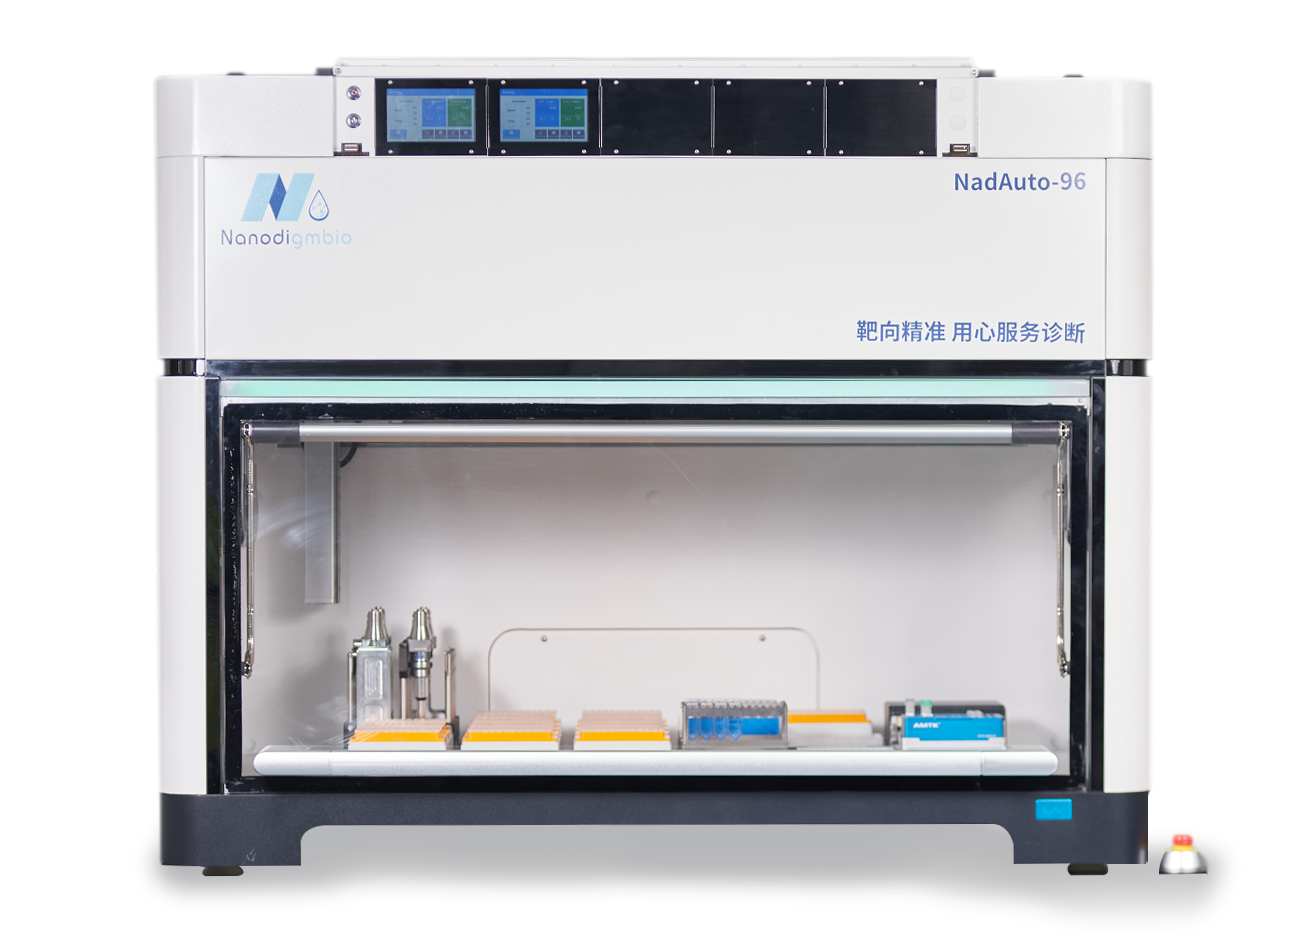 NadAuto-96 Automatic Sample System